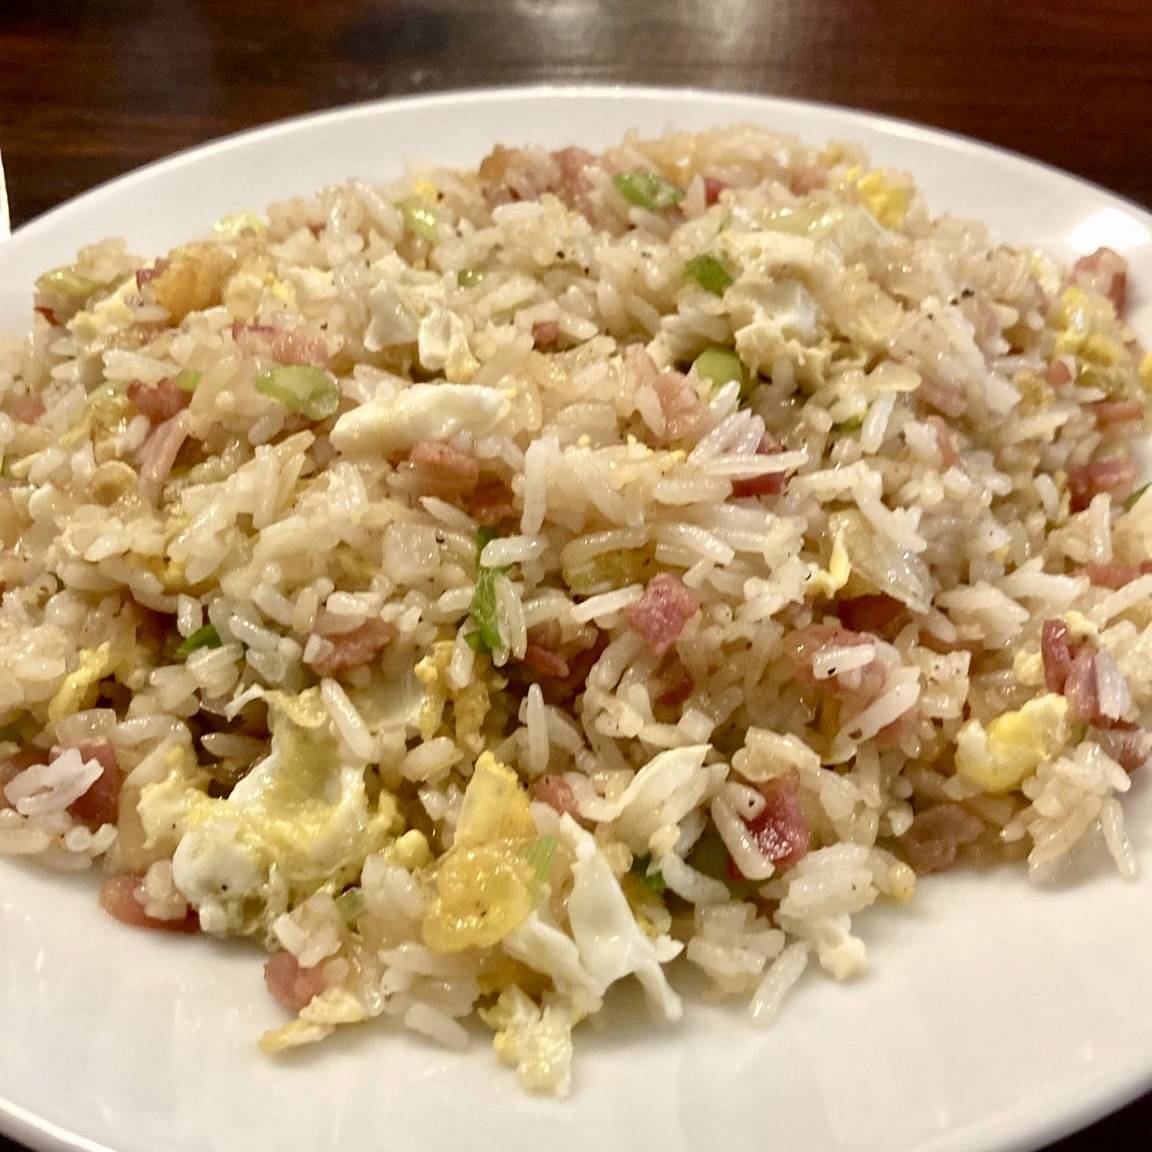 A plate of fried rice.